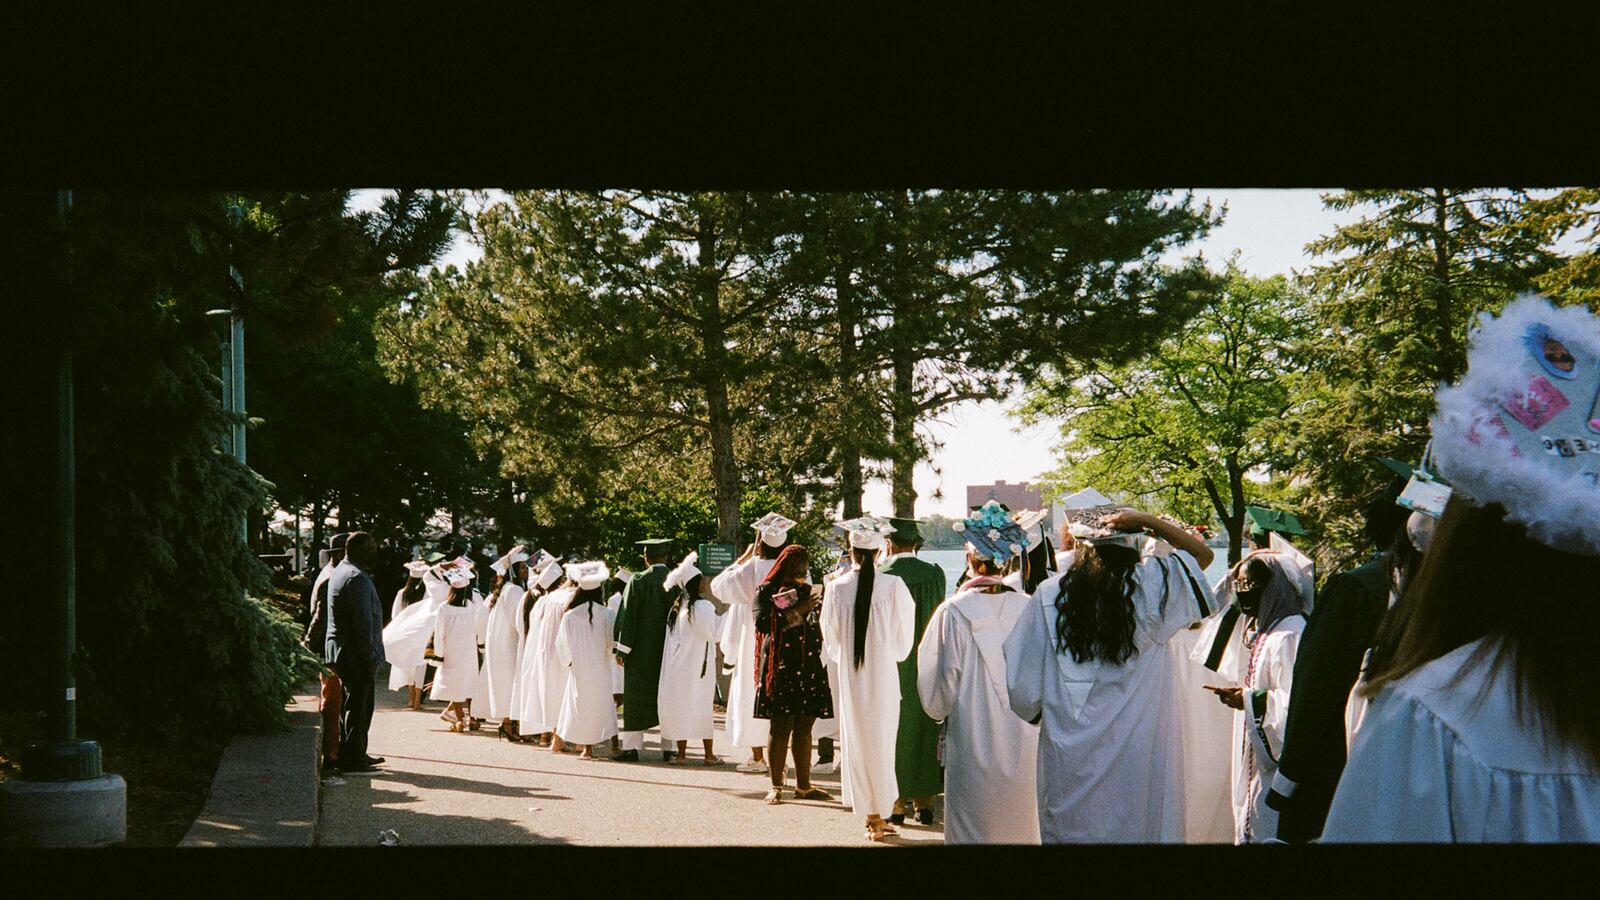 A long line of students in green and white graduation regalia walk through green trees to their ceremony.